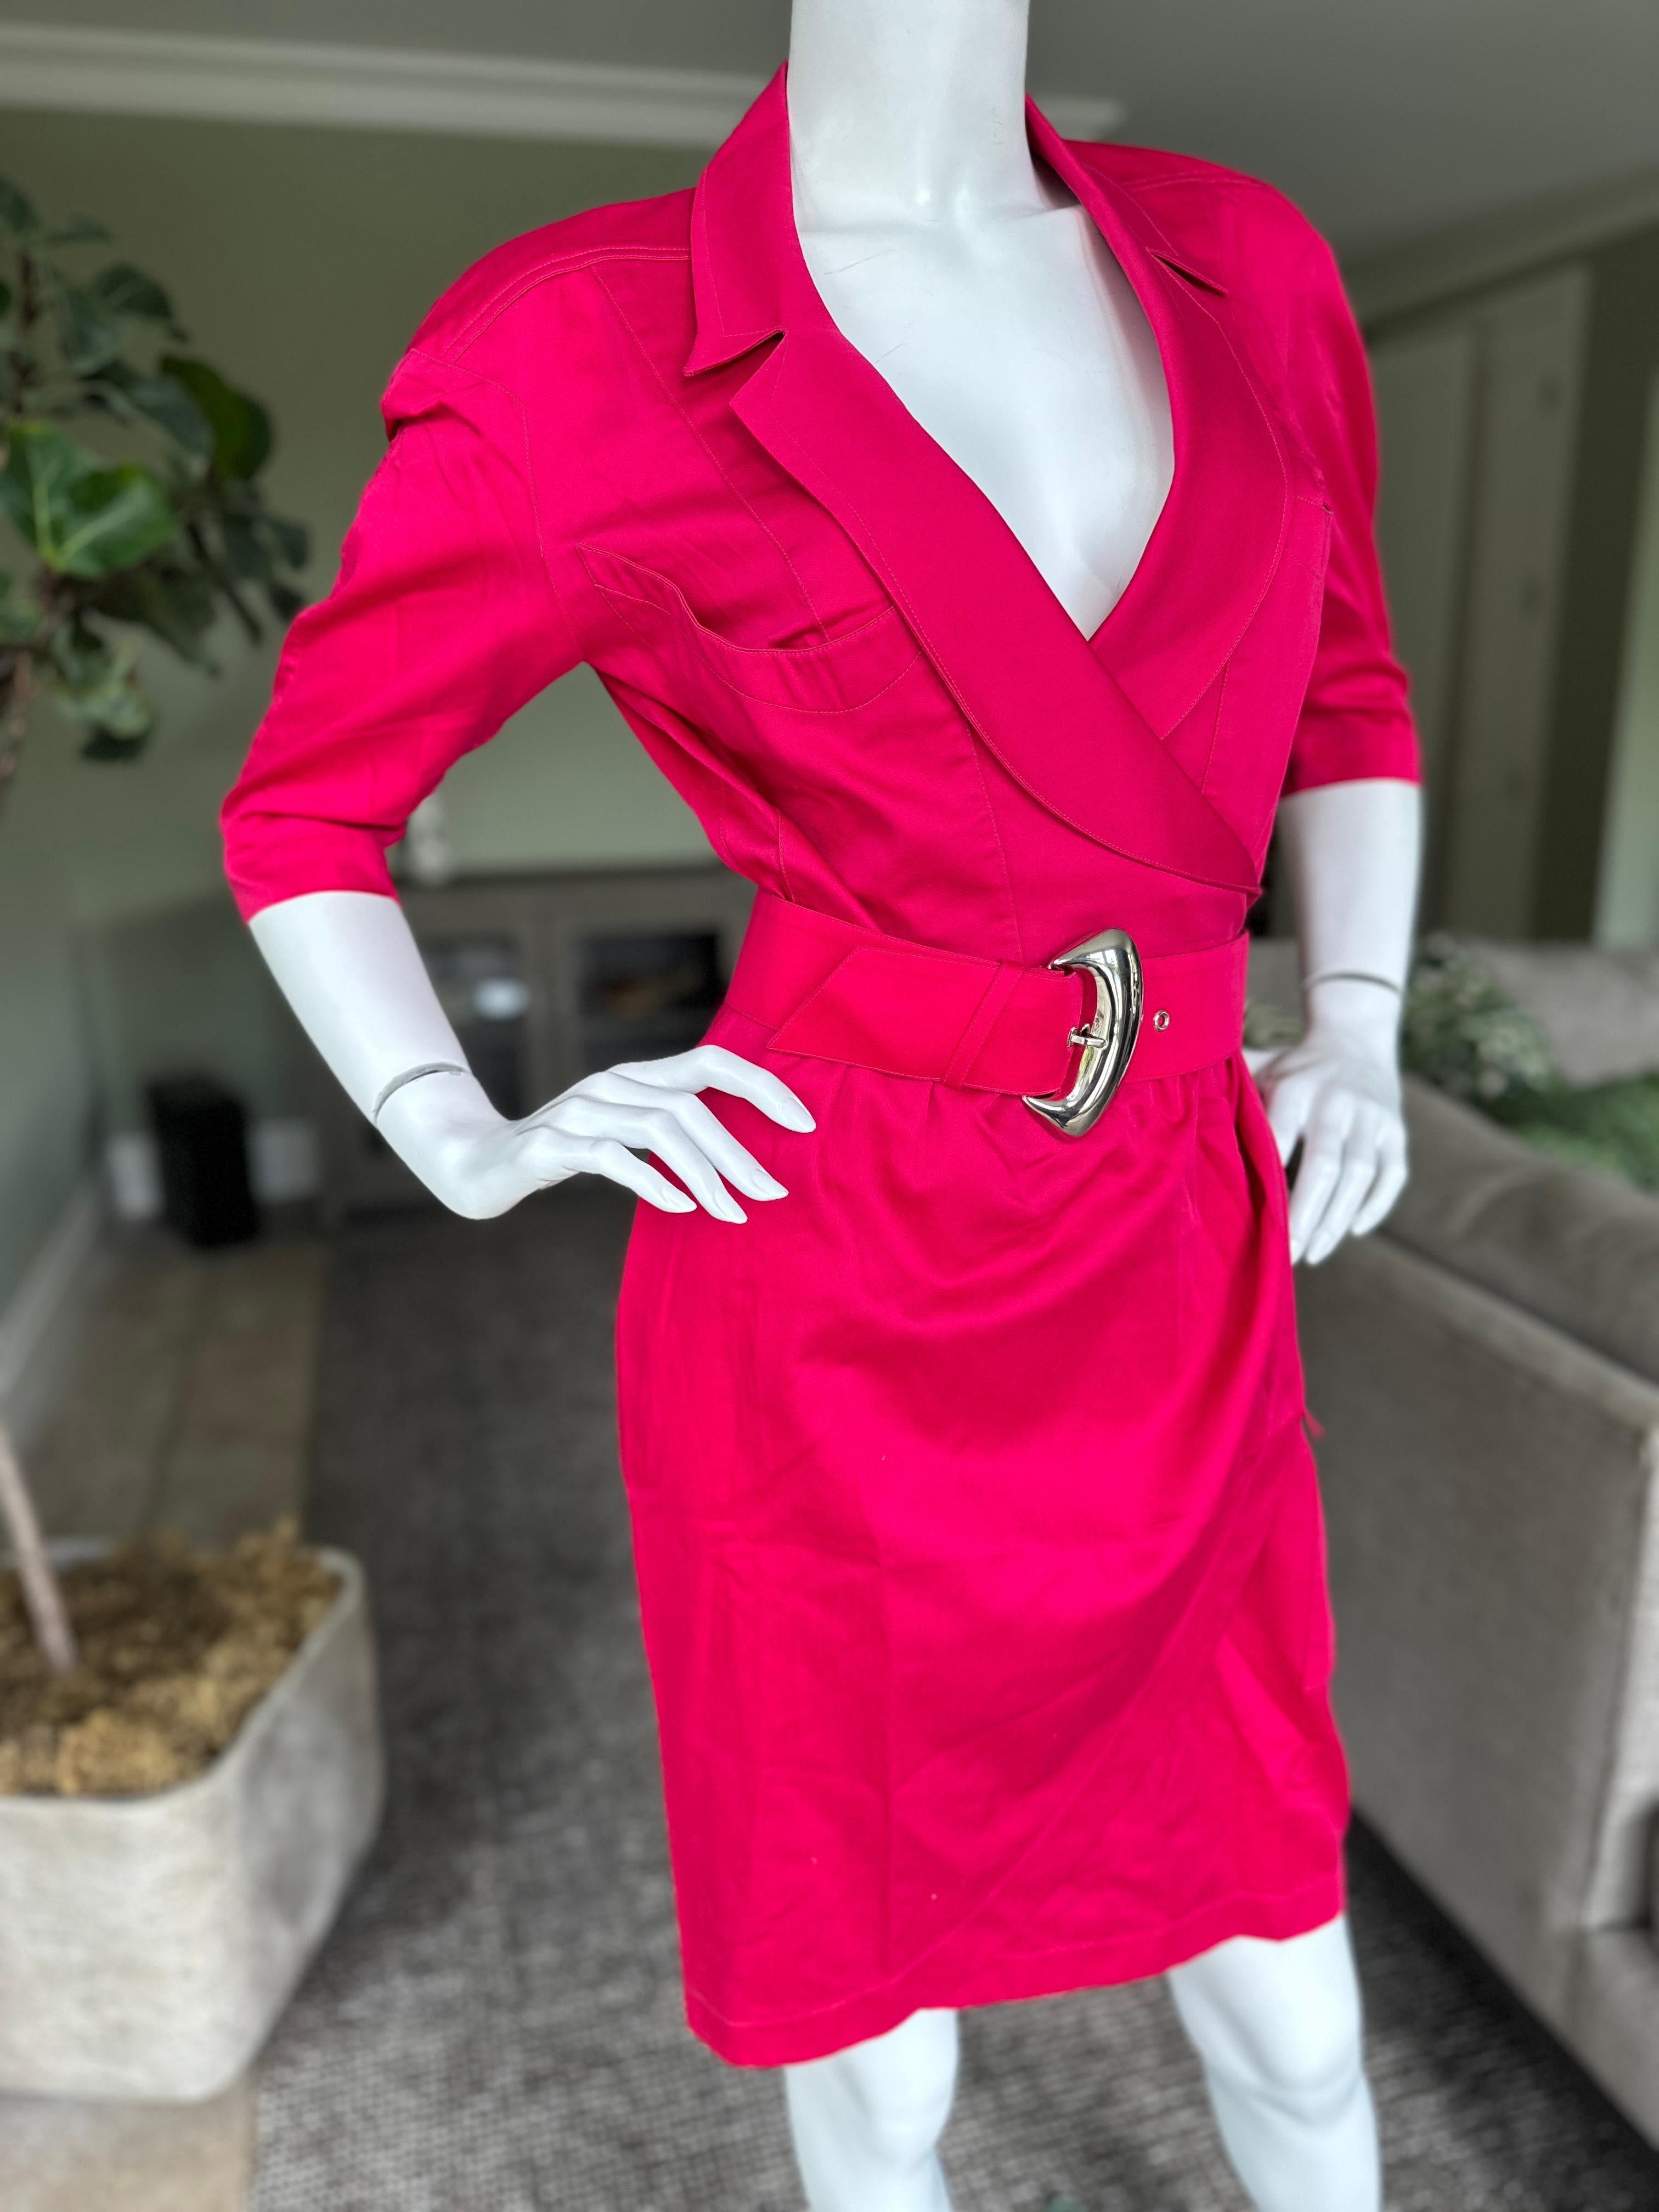 Women's Thierry Mugler Vintage 1980's Hot Pink Silk Wrap Style Dress with Mod Buckle For Sale